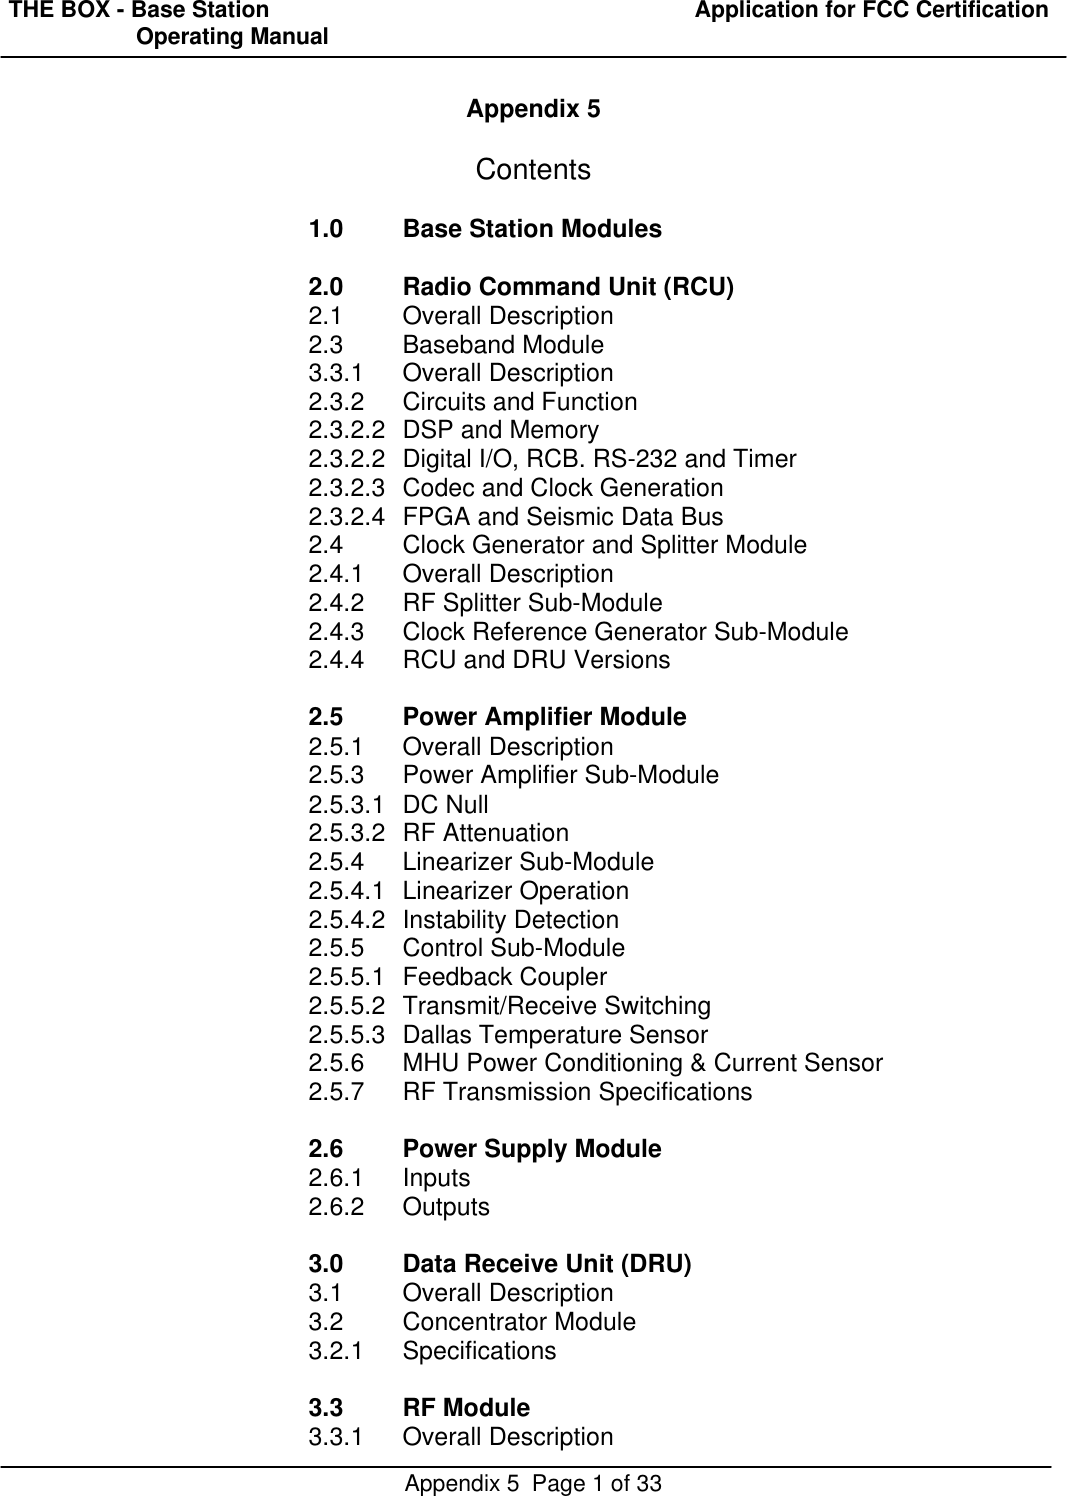 THE BOX - Base Station  Application for FCC Certification                    Operating ManualAppendix 5  Page 1 of 33Appendix 5Contents1.0 Base Station Modules2.0 Radio Command Unit (RCU)2.1 Overall Description2.3 Baseband Module3.3.1 Overall Description2.3.2 Circuits and Function2.3.2.2 DSP and Memory2.3.2.2 Digital I/O, RCB. RS-232 and Timer2.3.2.3 Codec and Clock Generation2.3.2.4 FPGA and Seismic Data Bus2.4 Clock Generator and Splitter Module2.4.1 Overall Description2.4.2 RF Splitter Sub-Module2.4.3 Clock Reference Generator Sub-Module2.4.4 RCU and DRU Versions2.5 Power Amplifier Module2.5.1 Overall Description2.5.3 Power Amplifier Sub-Module2.5.3.1 DC Null2.5.3.2 RF Attenuation2.5.4 Linearizer Sub-Module2.5.4.1 Linearizer Operation2.5.4.2 Instability Detection2.5.5 Control Sub-Module2.5.5.1 Feedback Coupler2.5.5.2 Transmit/Receive Switching2.5.5.3 Dallas Temperature Sensor2.5.6 MHU Power Conditioning &amp; Current Sensor2.5.7 RF Transmission Specifications2.6 Power Supply Module2.6.1 Inputs2.6.2Outputs3.0 Data Receive Unit (DRU)3.1 Overall Description3.2 Concentrator Module3.2.1 Specifications3.3 RF Module3.3.1 Overall Description